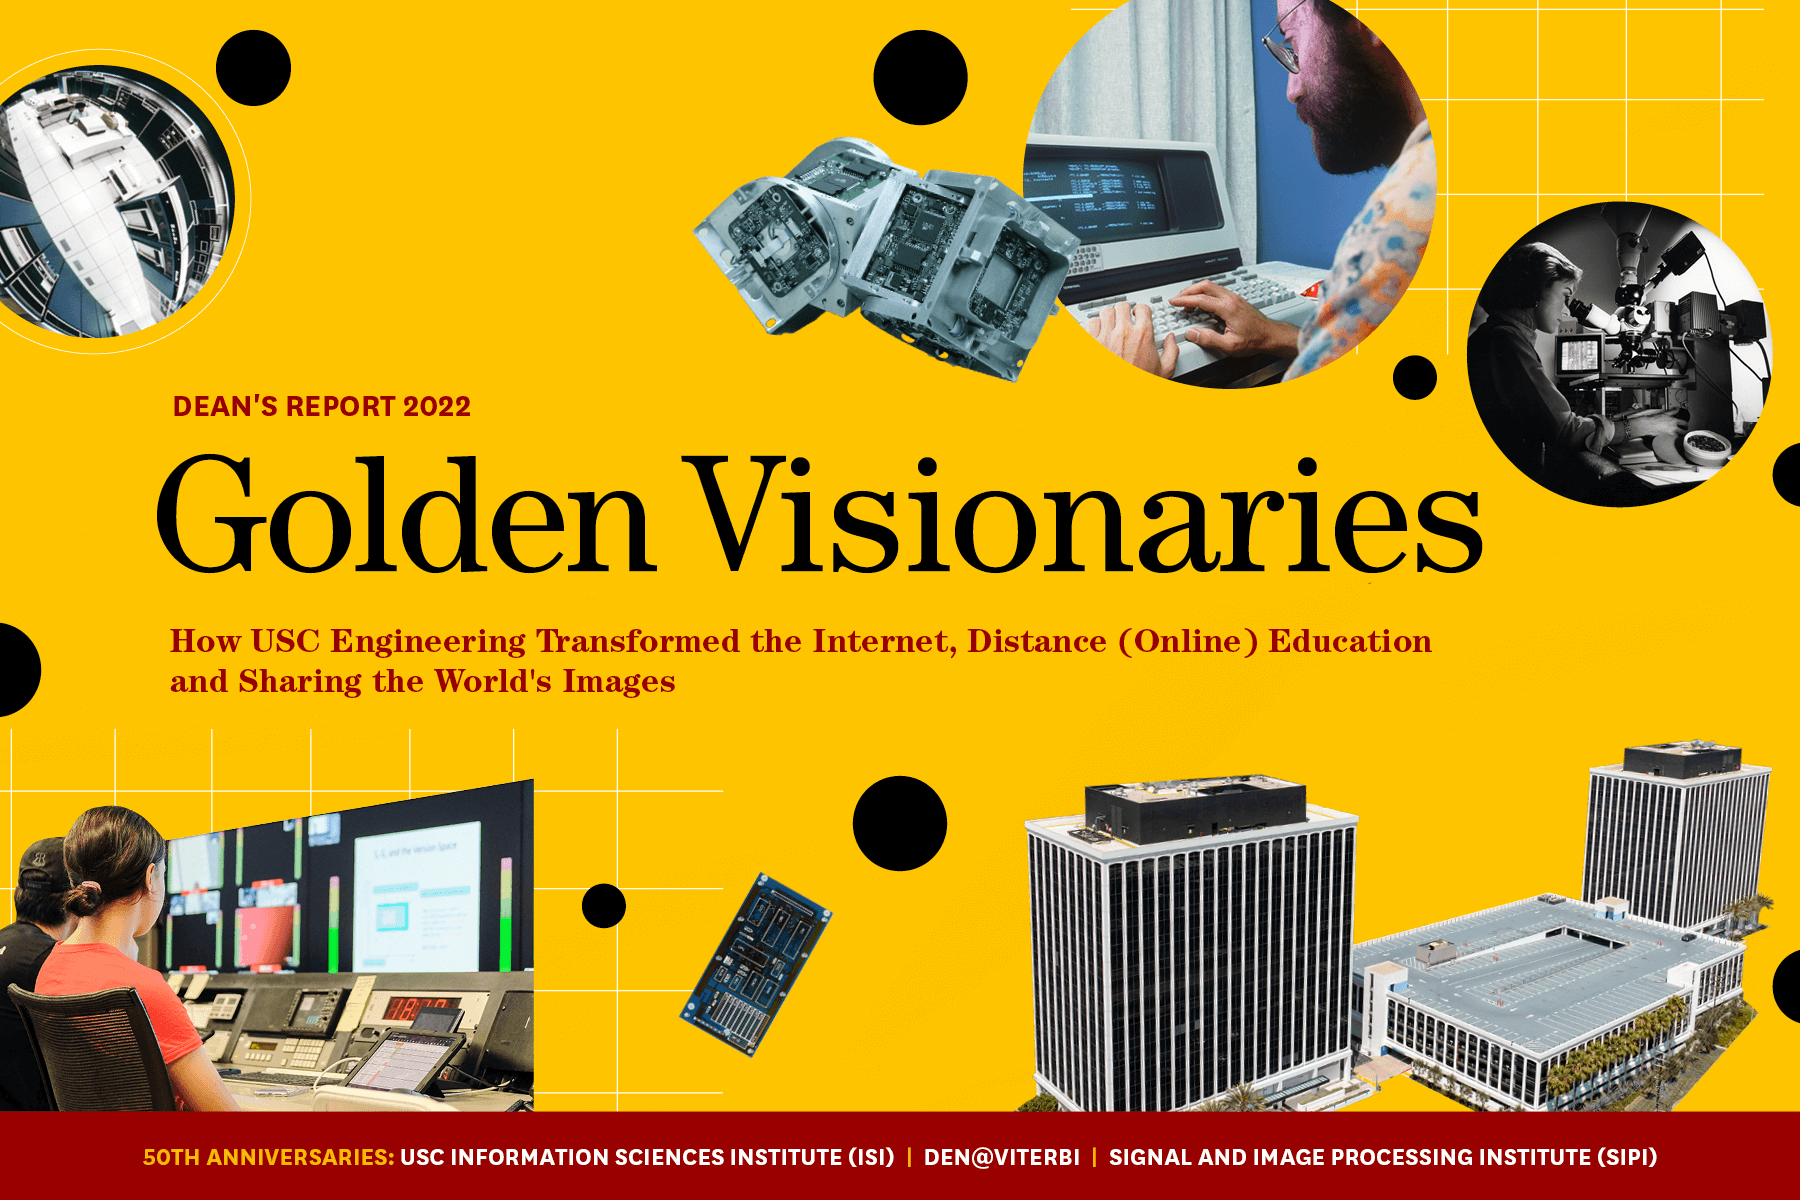 Cover of 2022 Dean's Report, "Golden Visionaries: How USC Transformed the Internet, Distance (Online) Education and Sharing the World's Images"